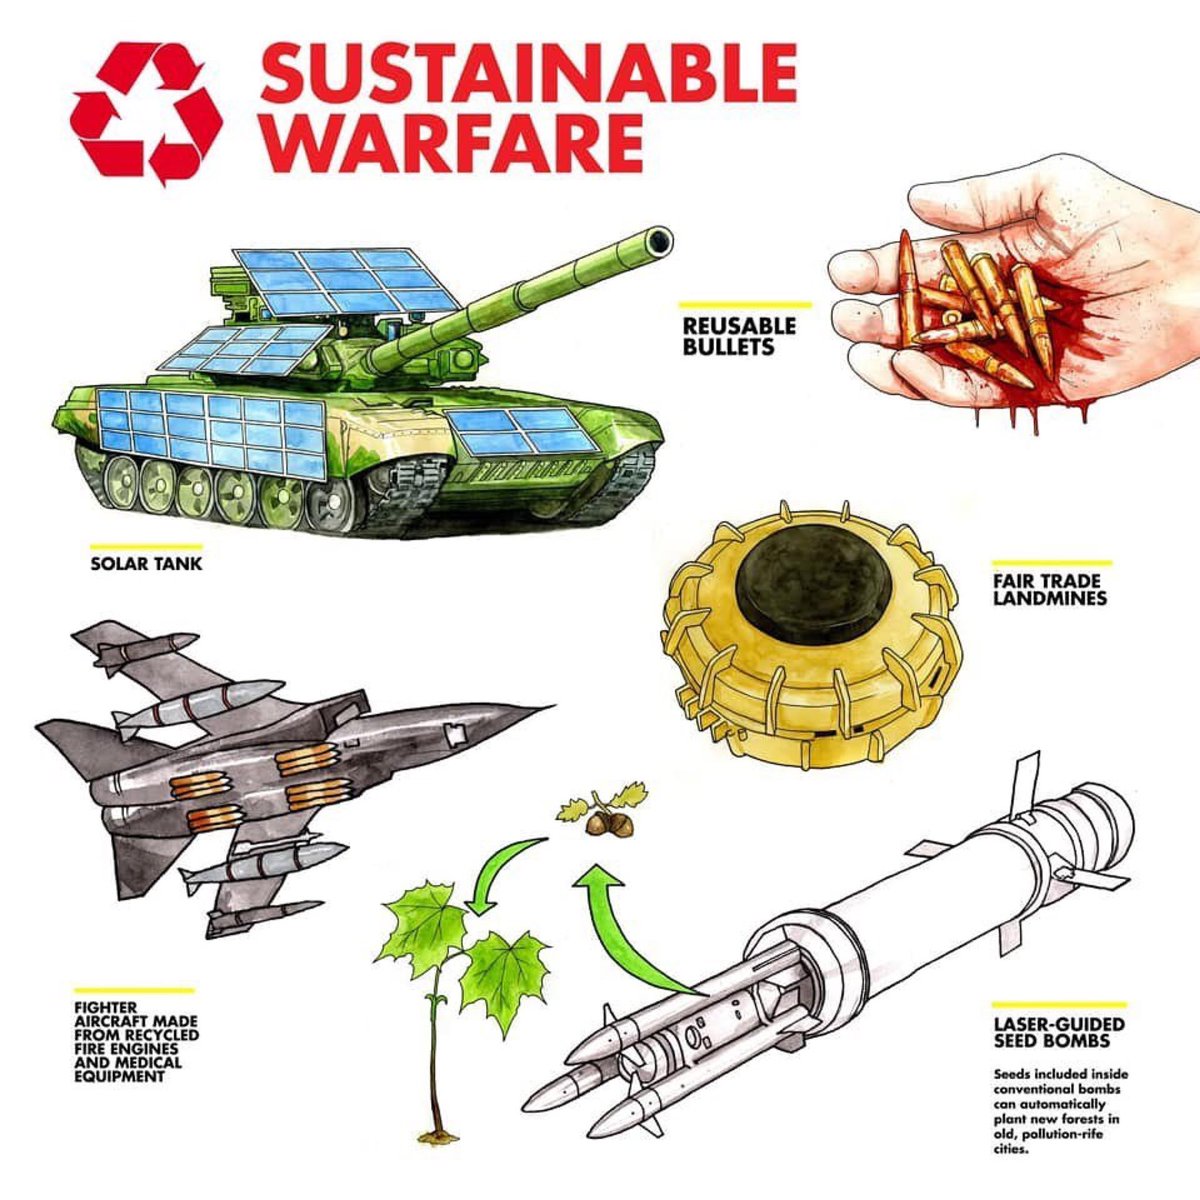 “greening the military” is a #falsesolution, there’s nothing sustainable about warfare.